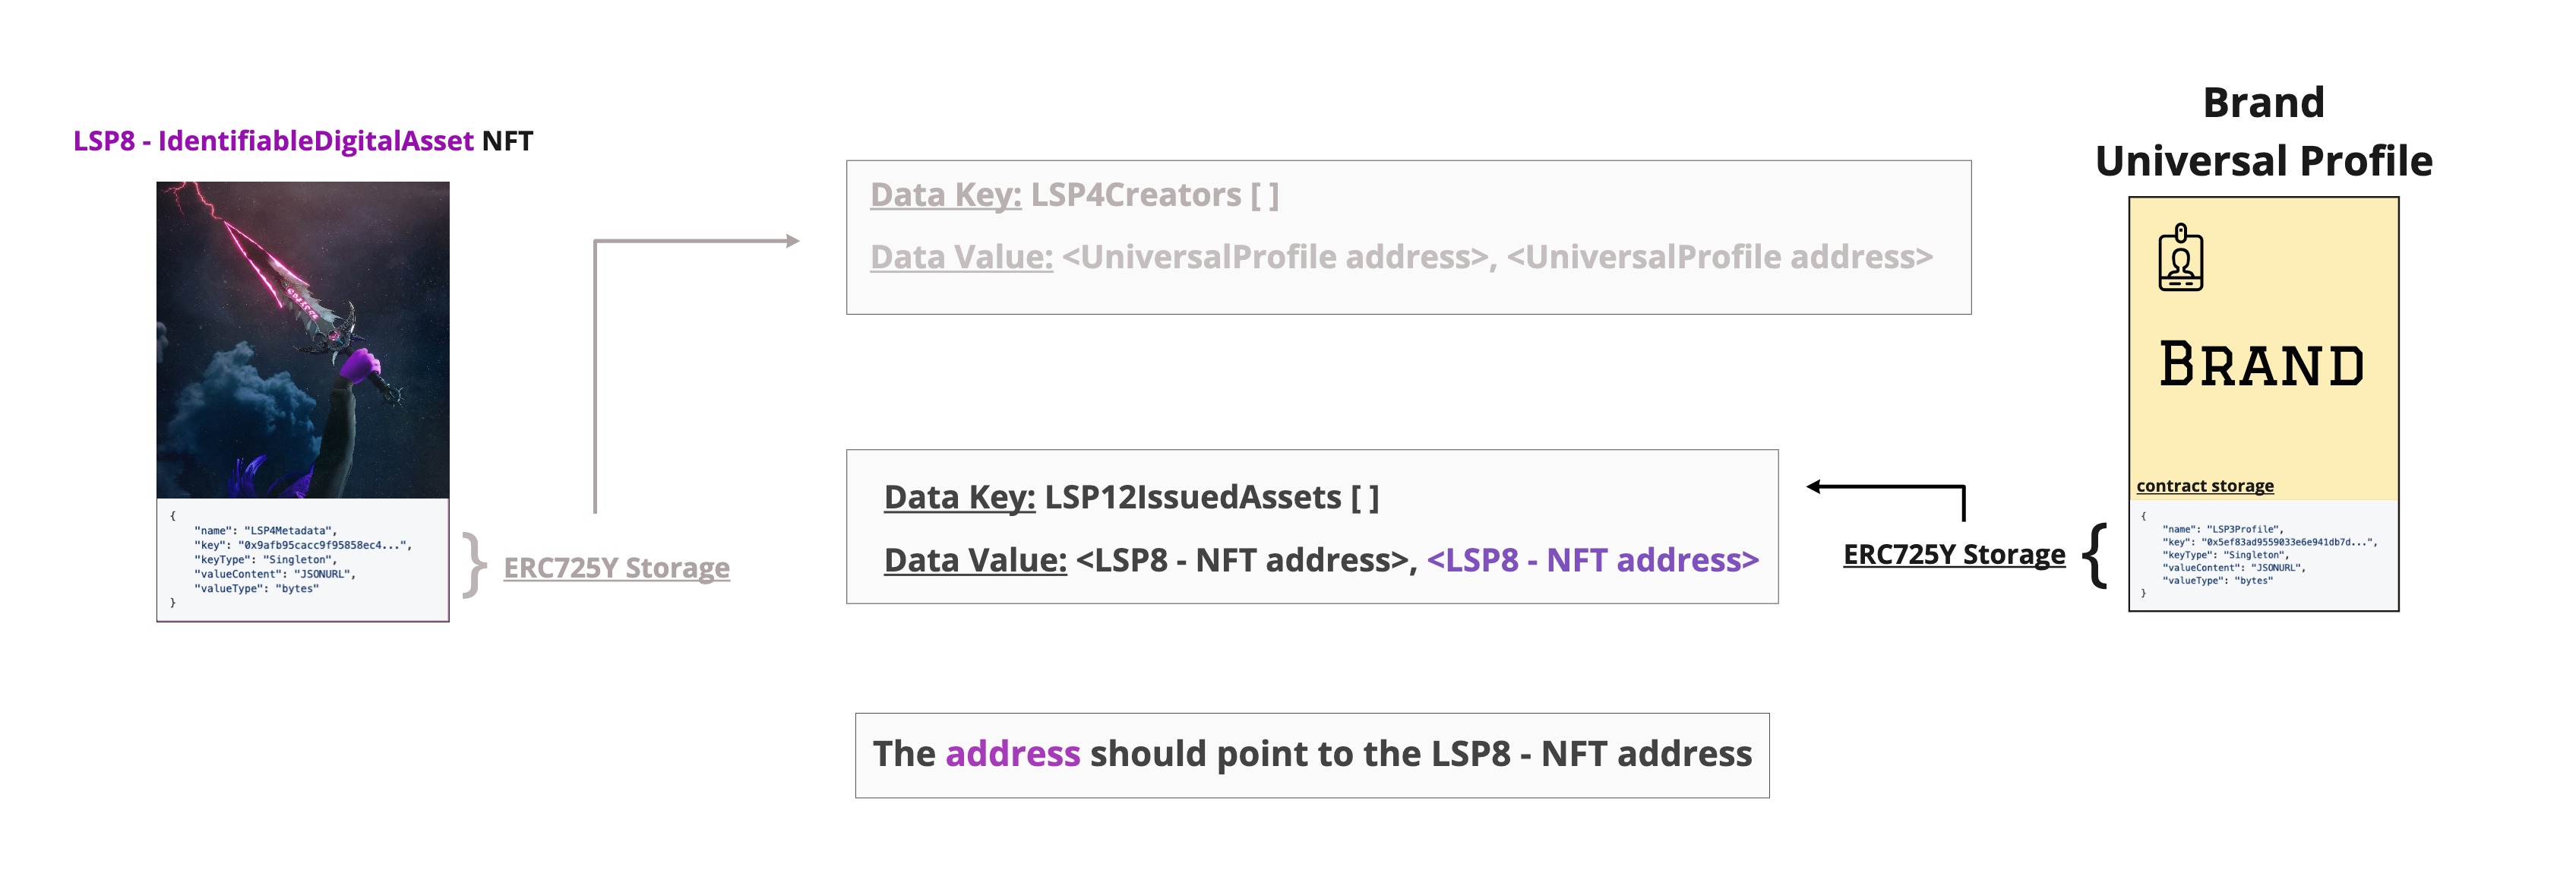 Checking LSP12IssuedAssets Array on UP